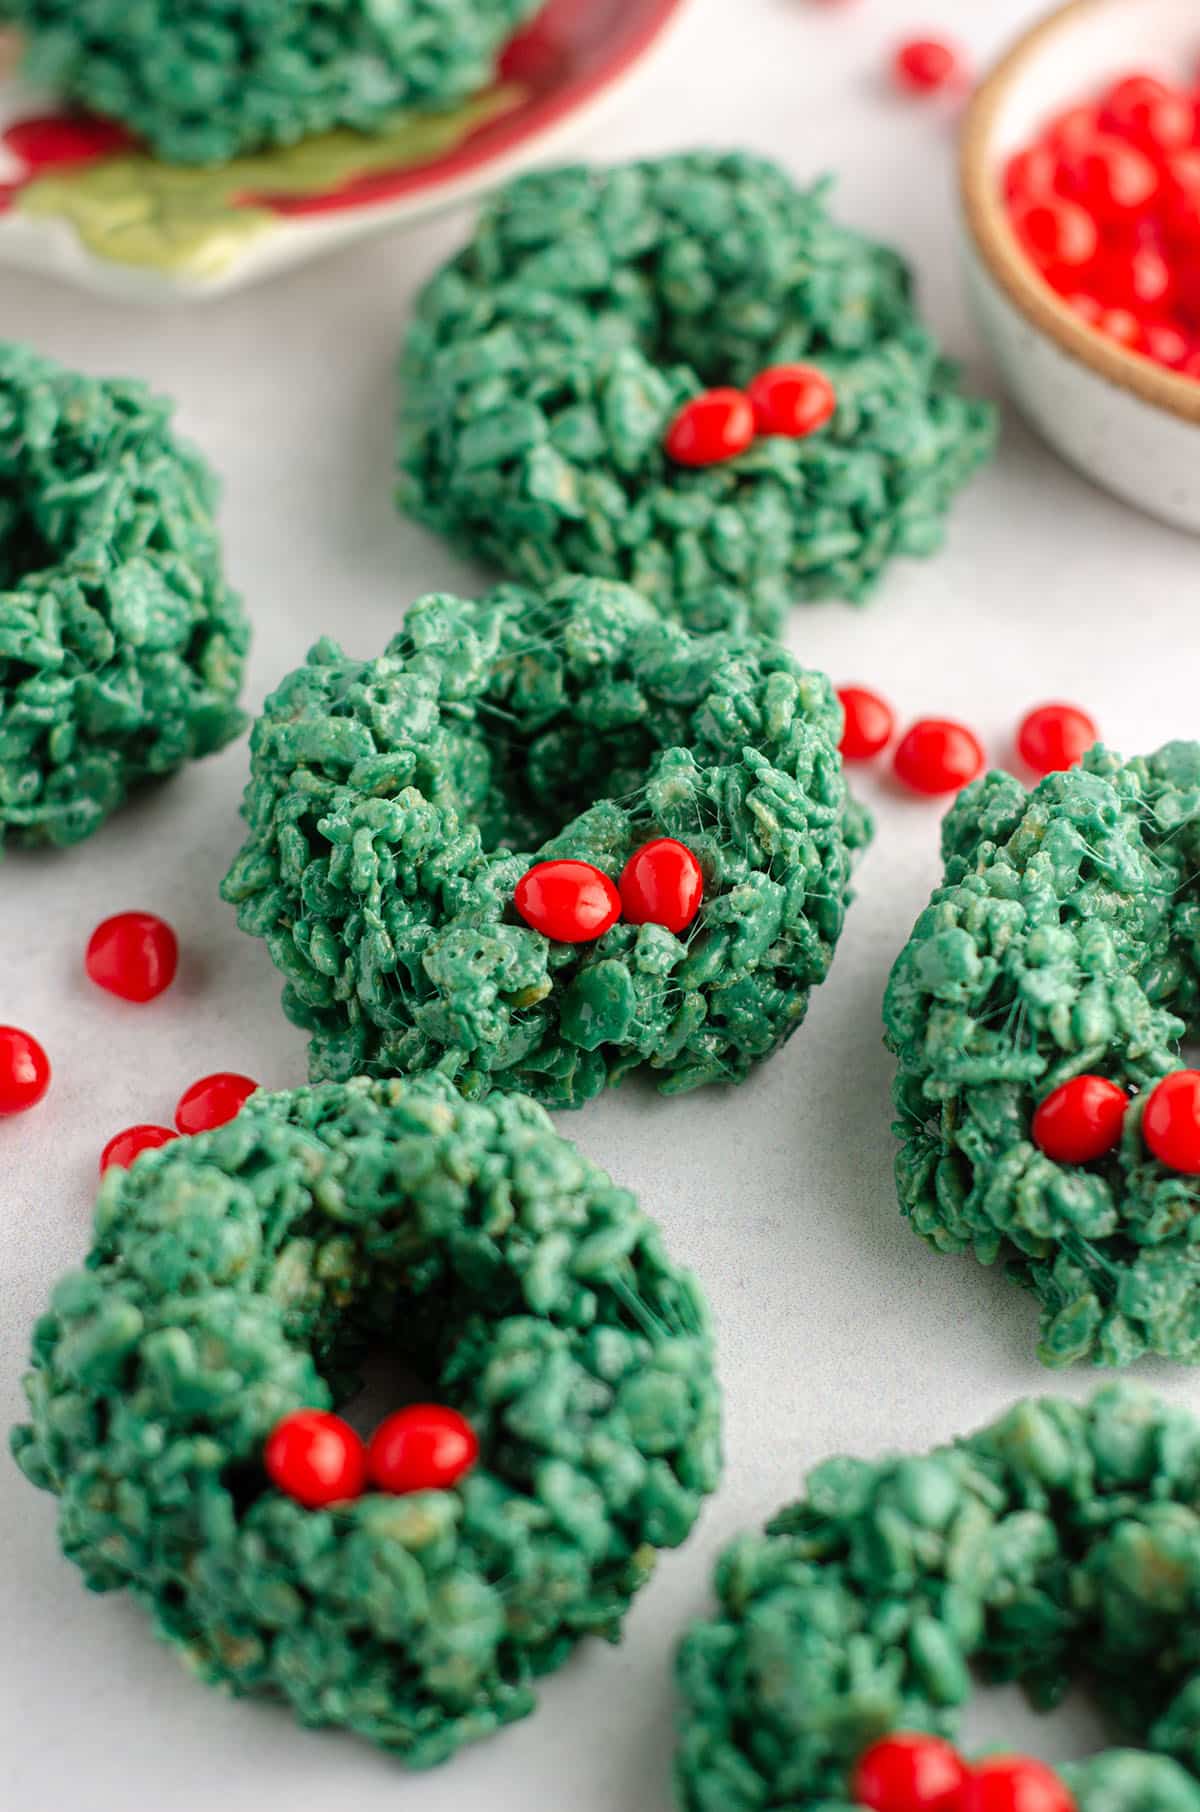 rice krispies wreaths with red candies scattered around